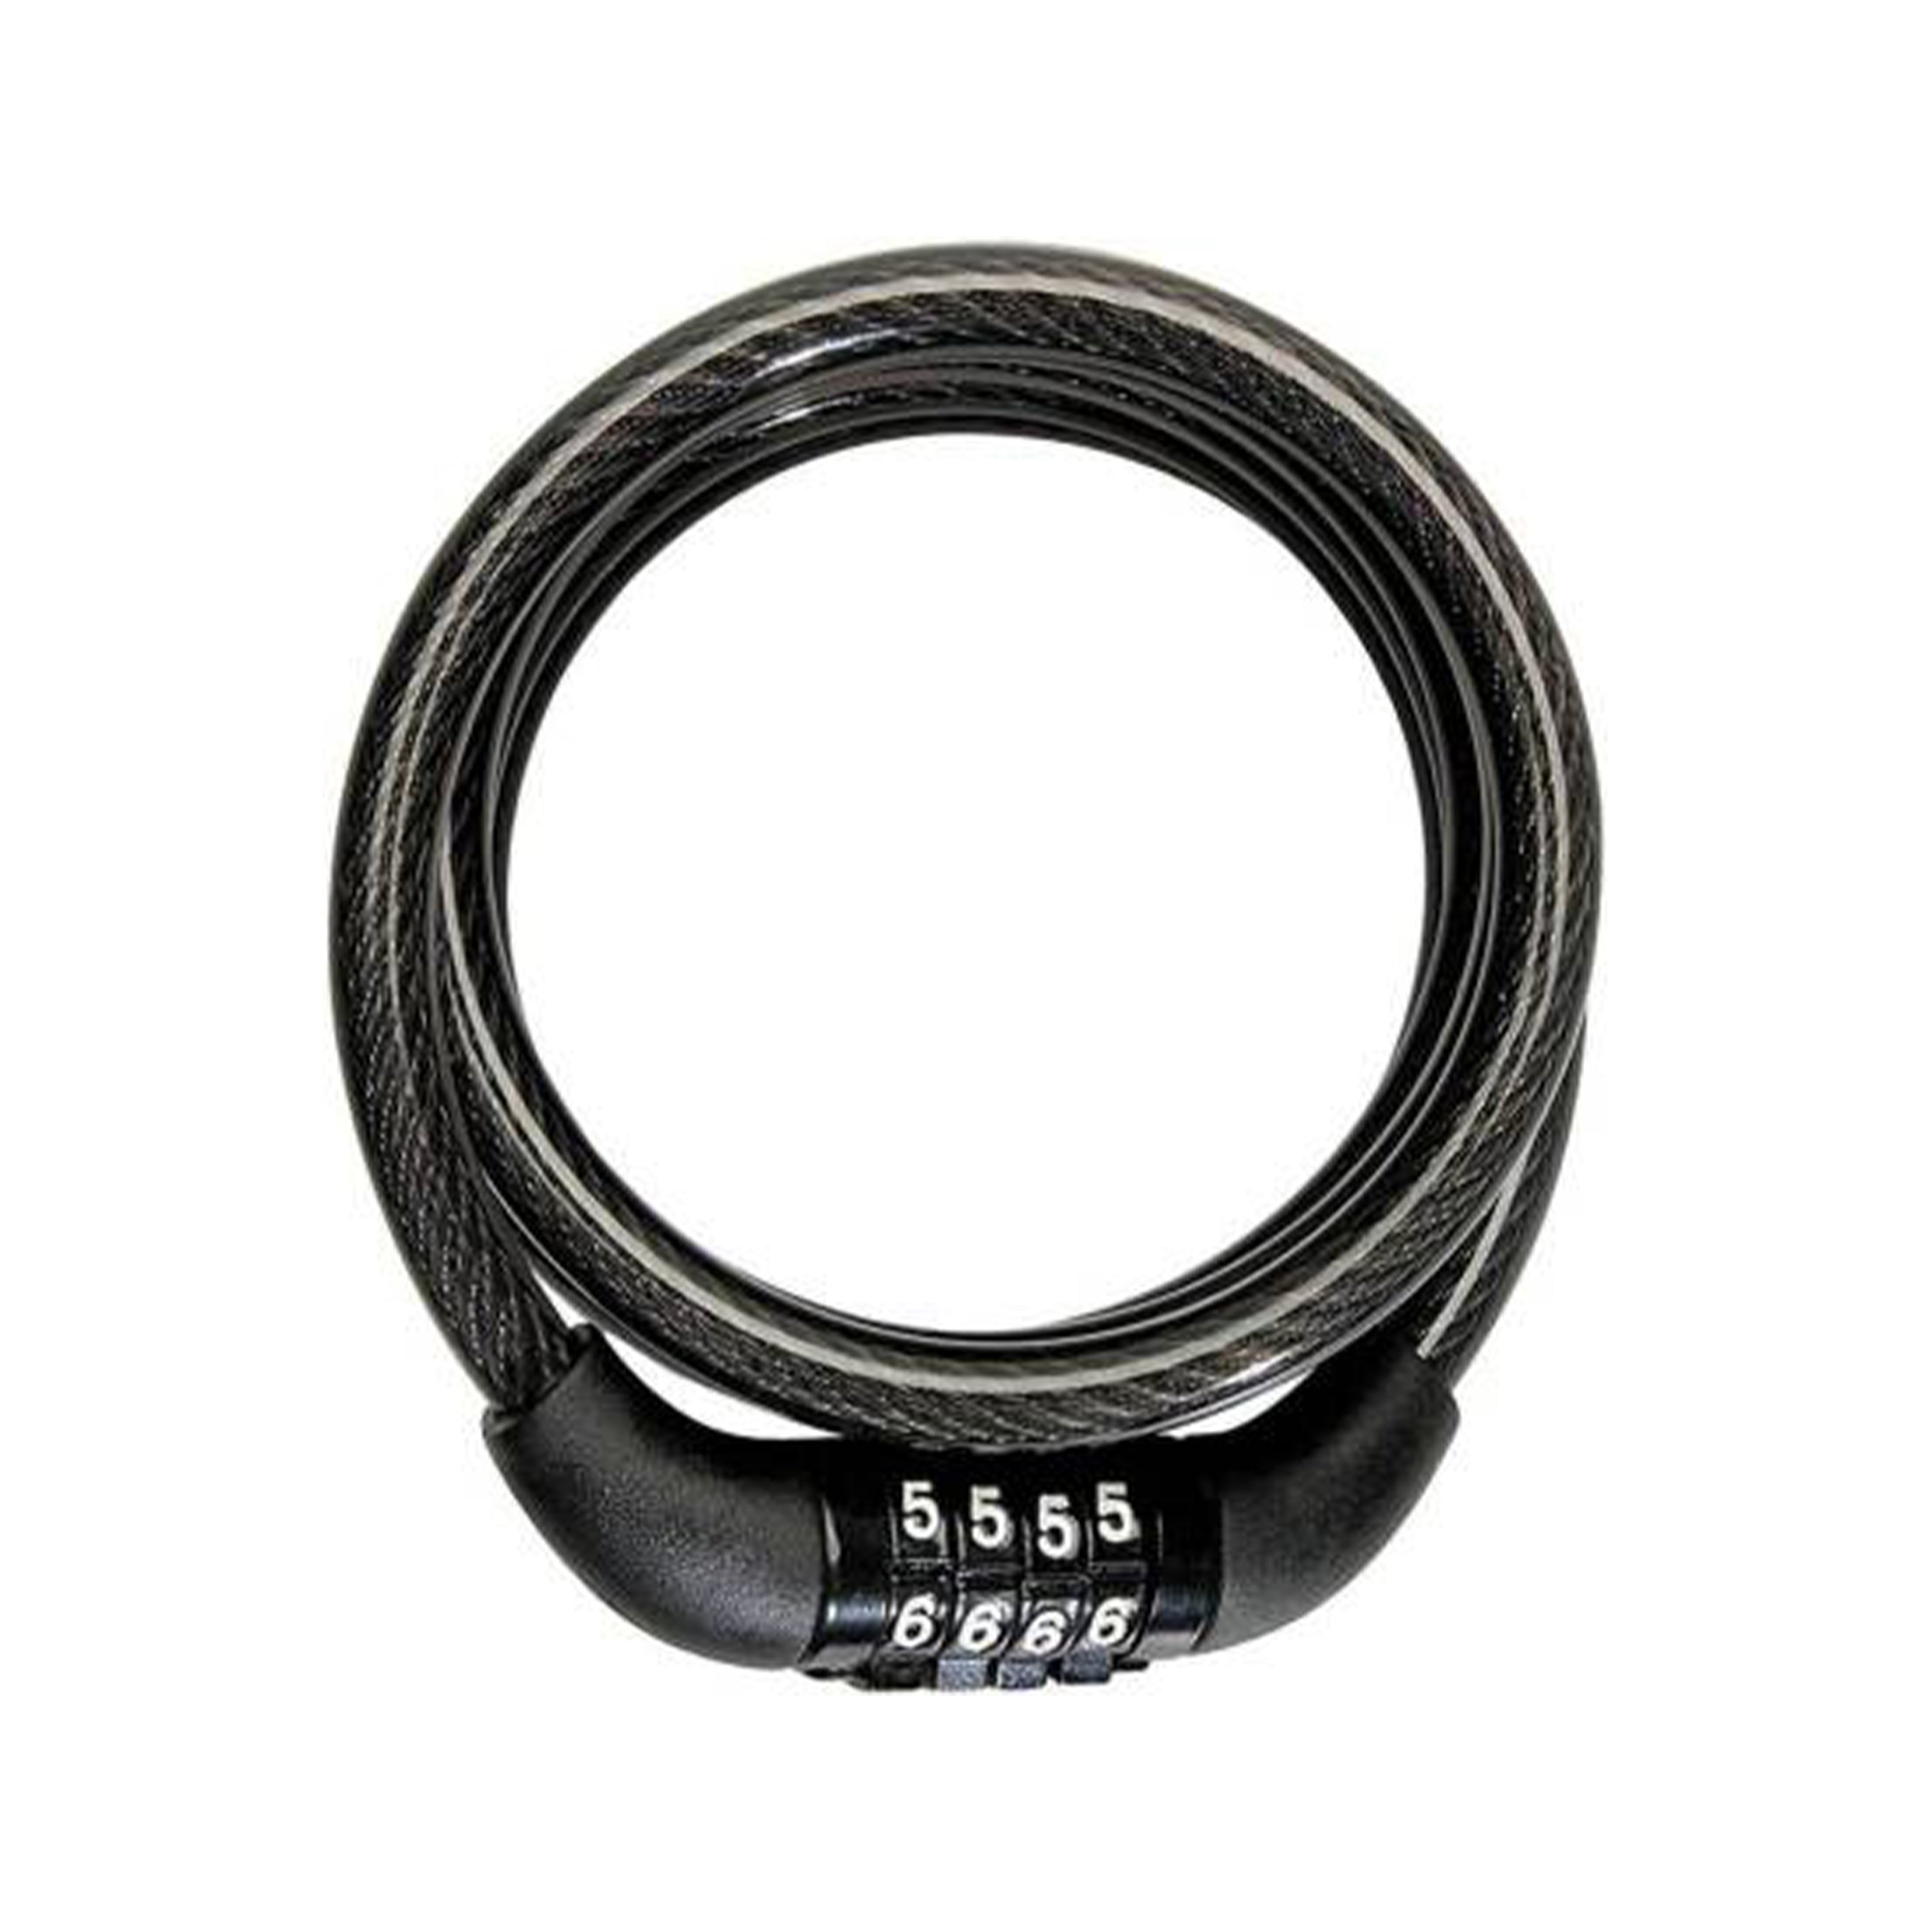 Leader Bicycle 4 Digit Number Lock without Clamp